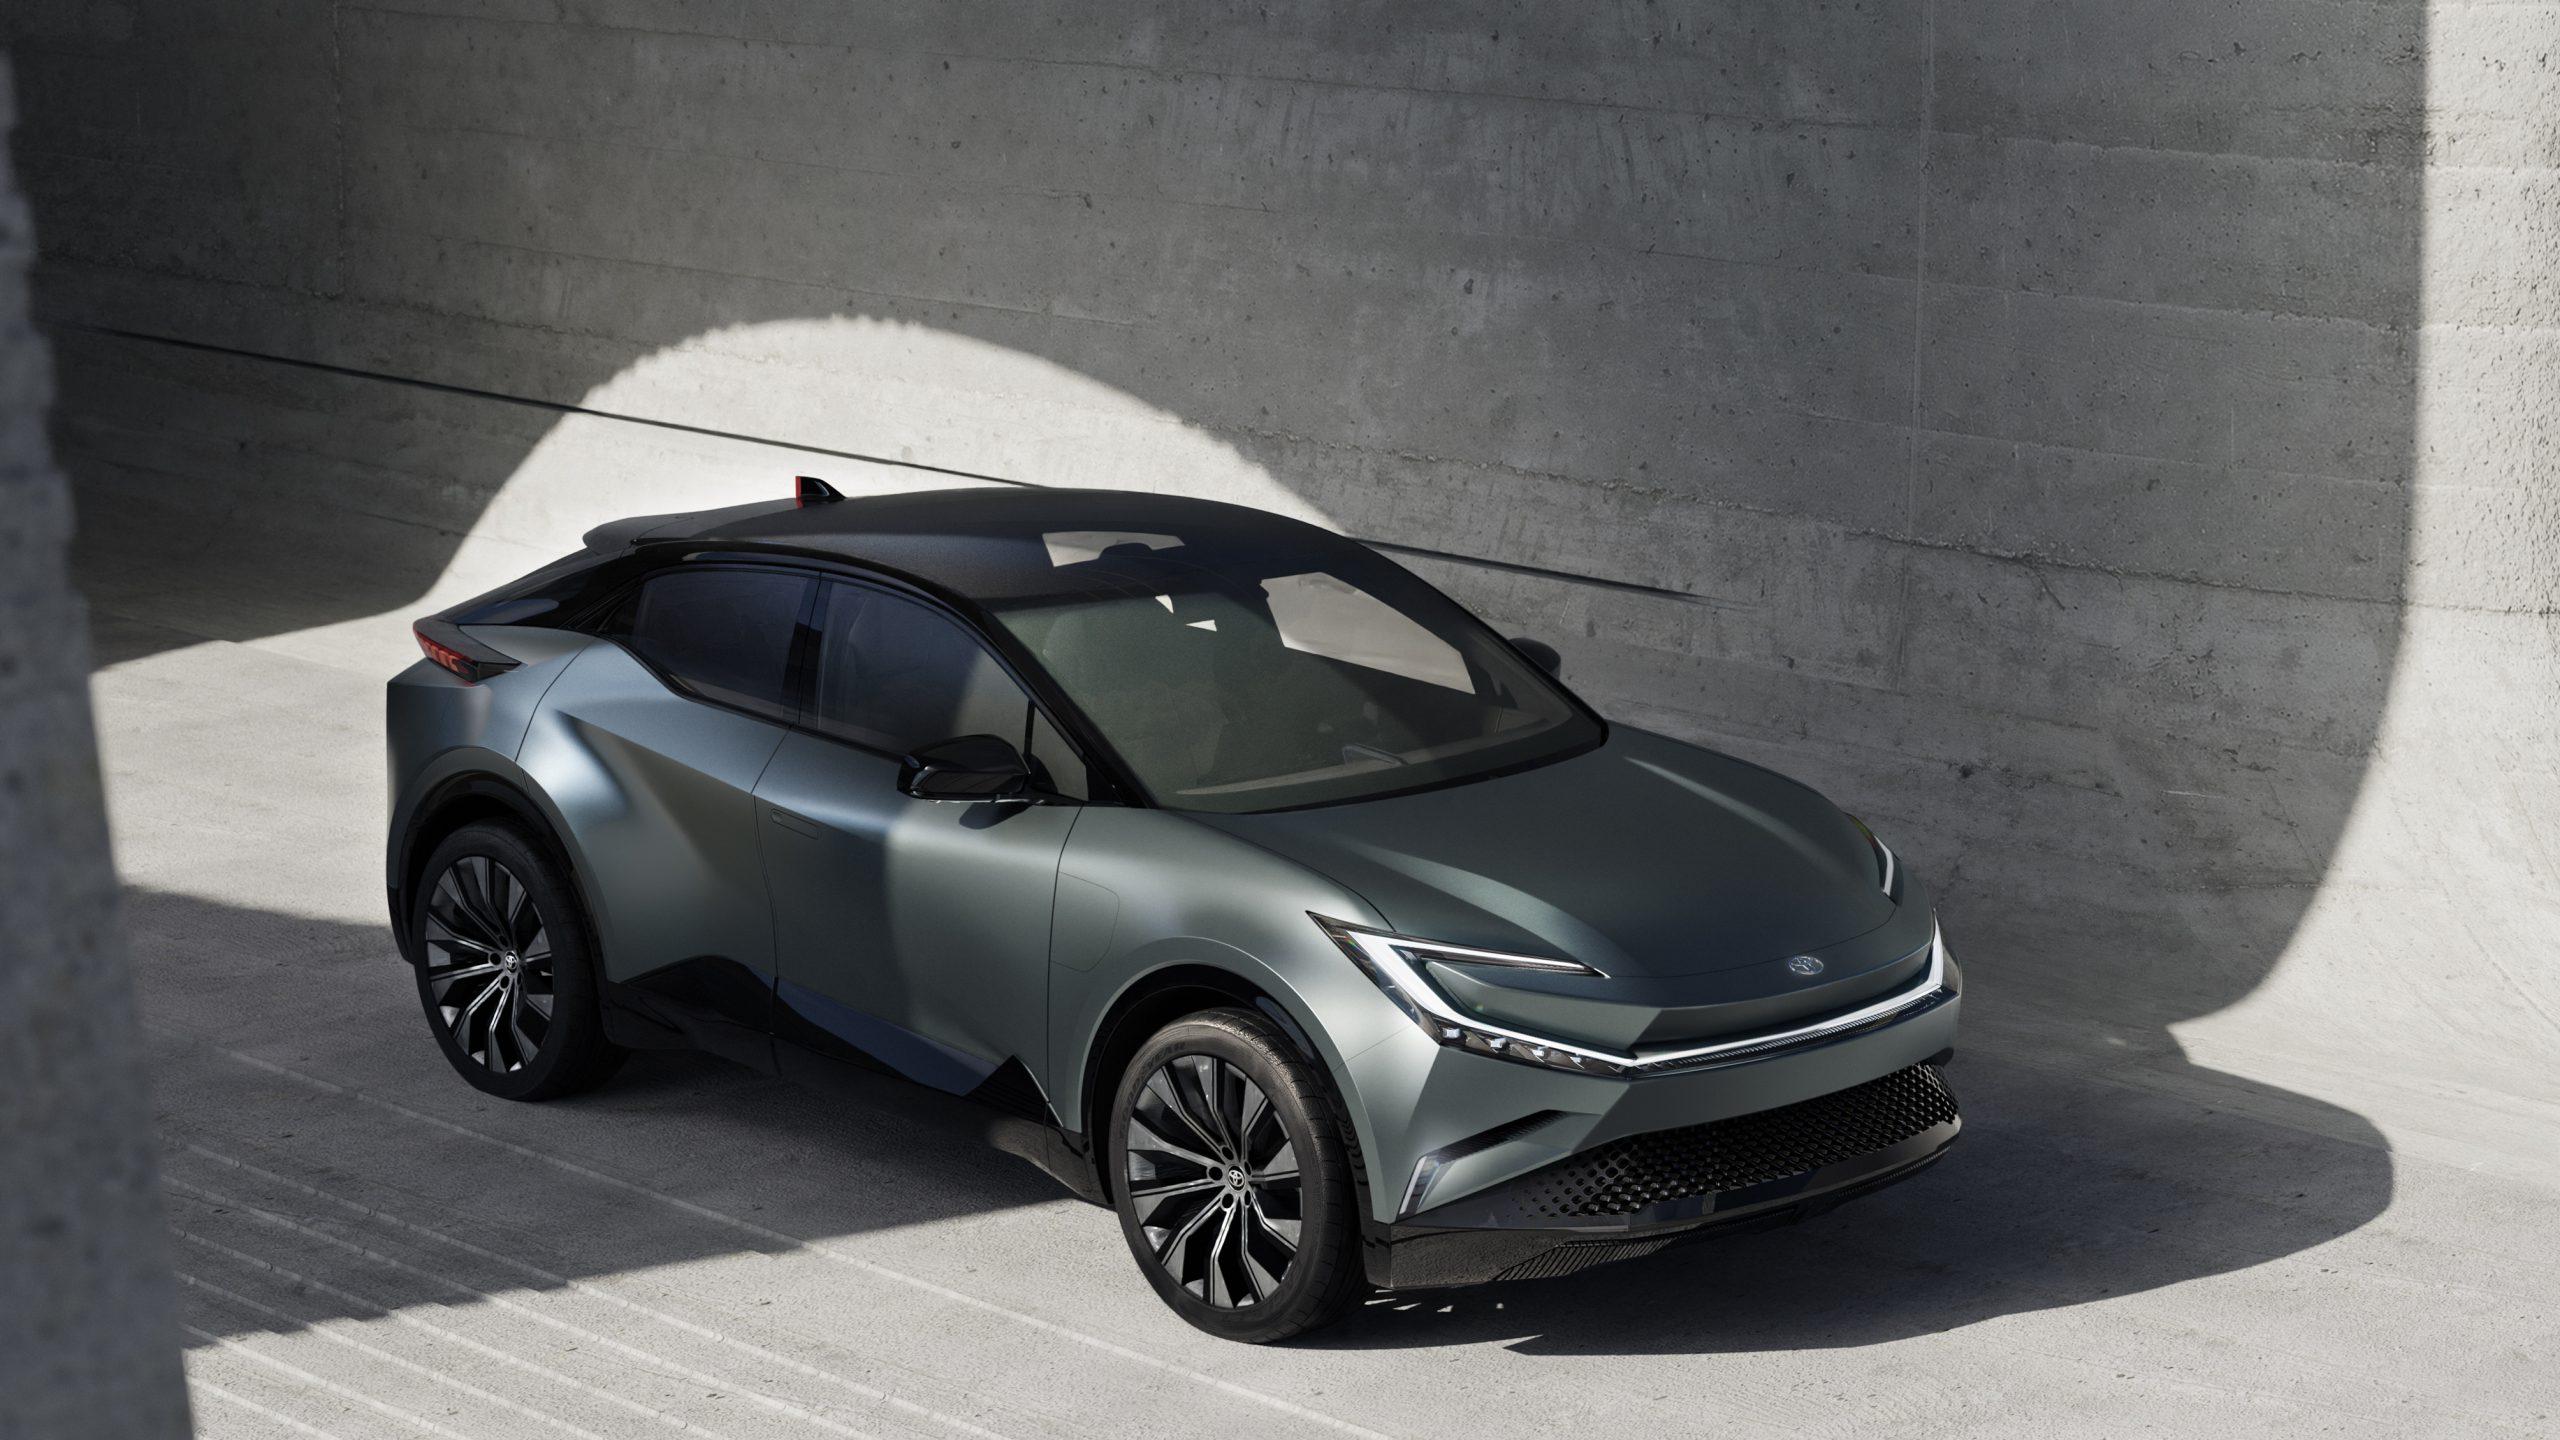 Toyota bZ Compact SUV Concept makes its European debut